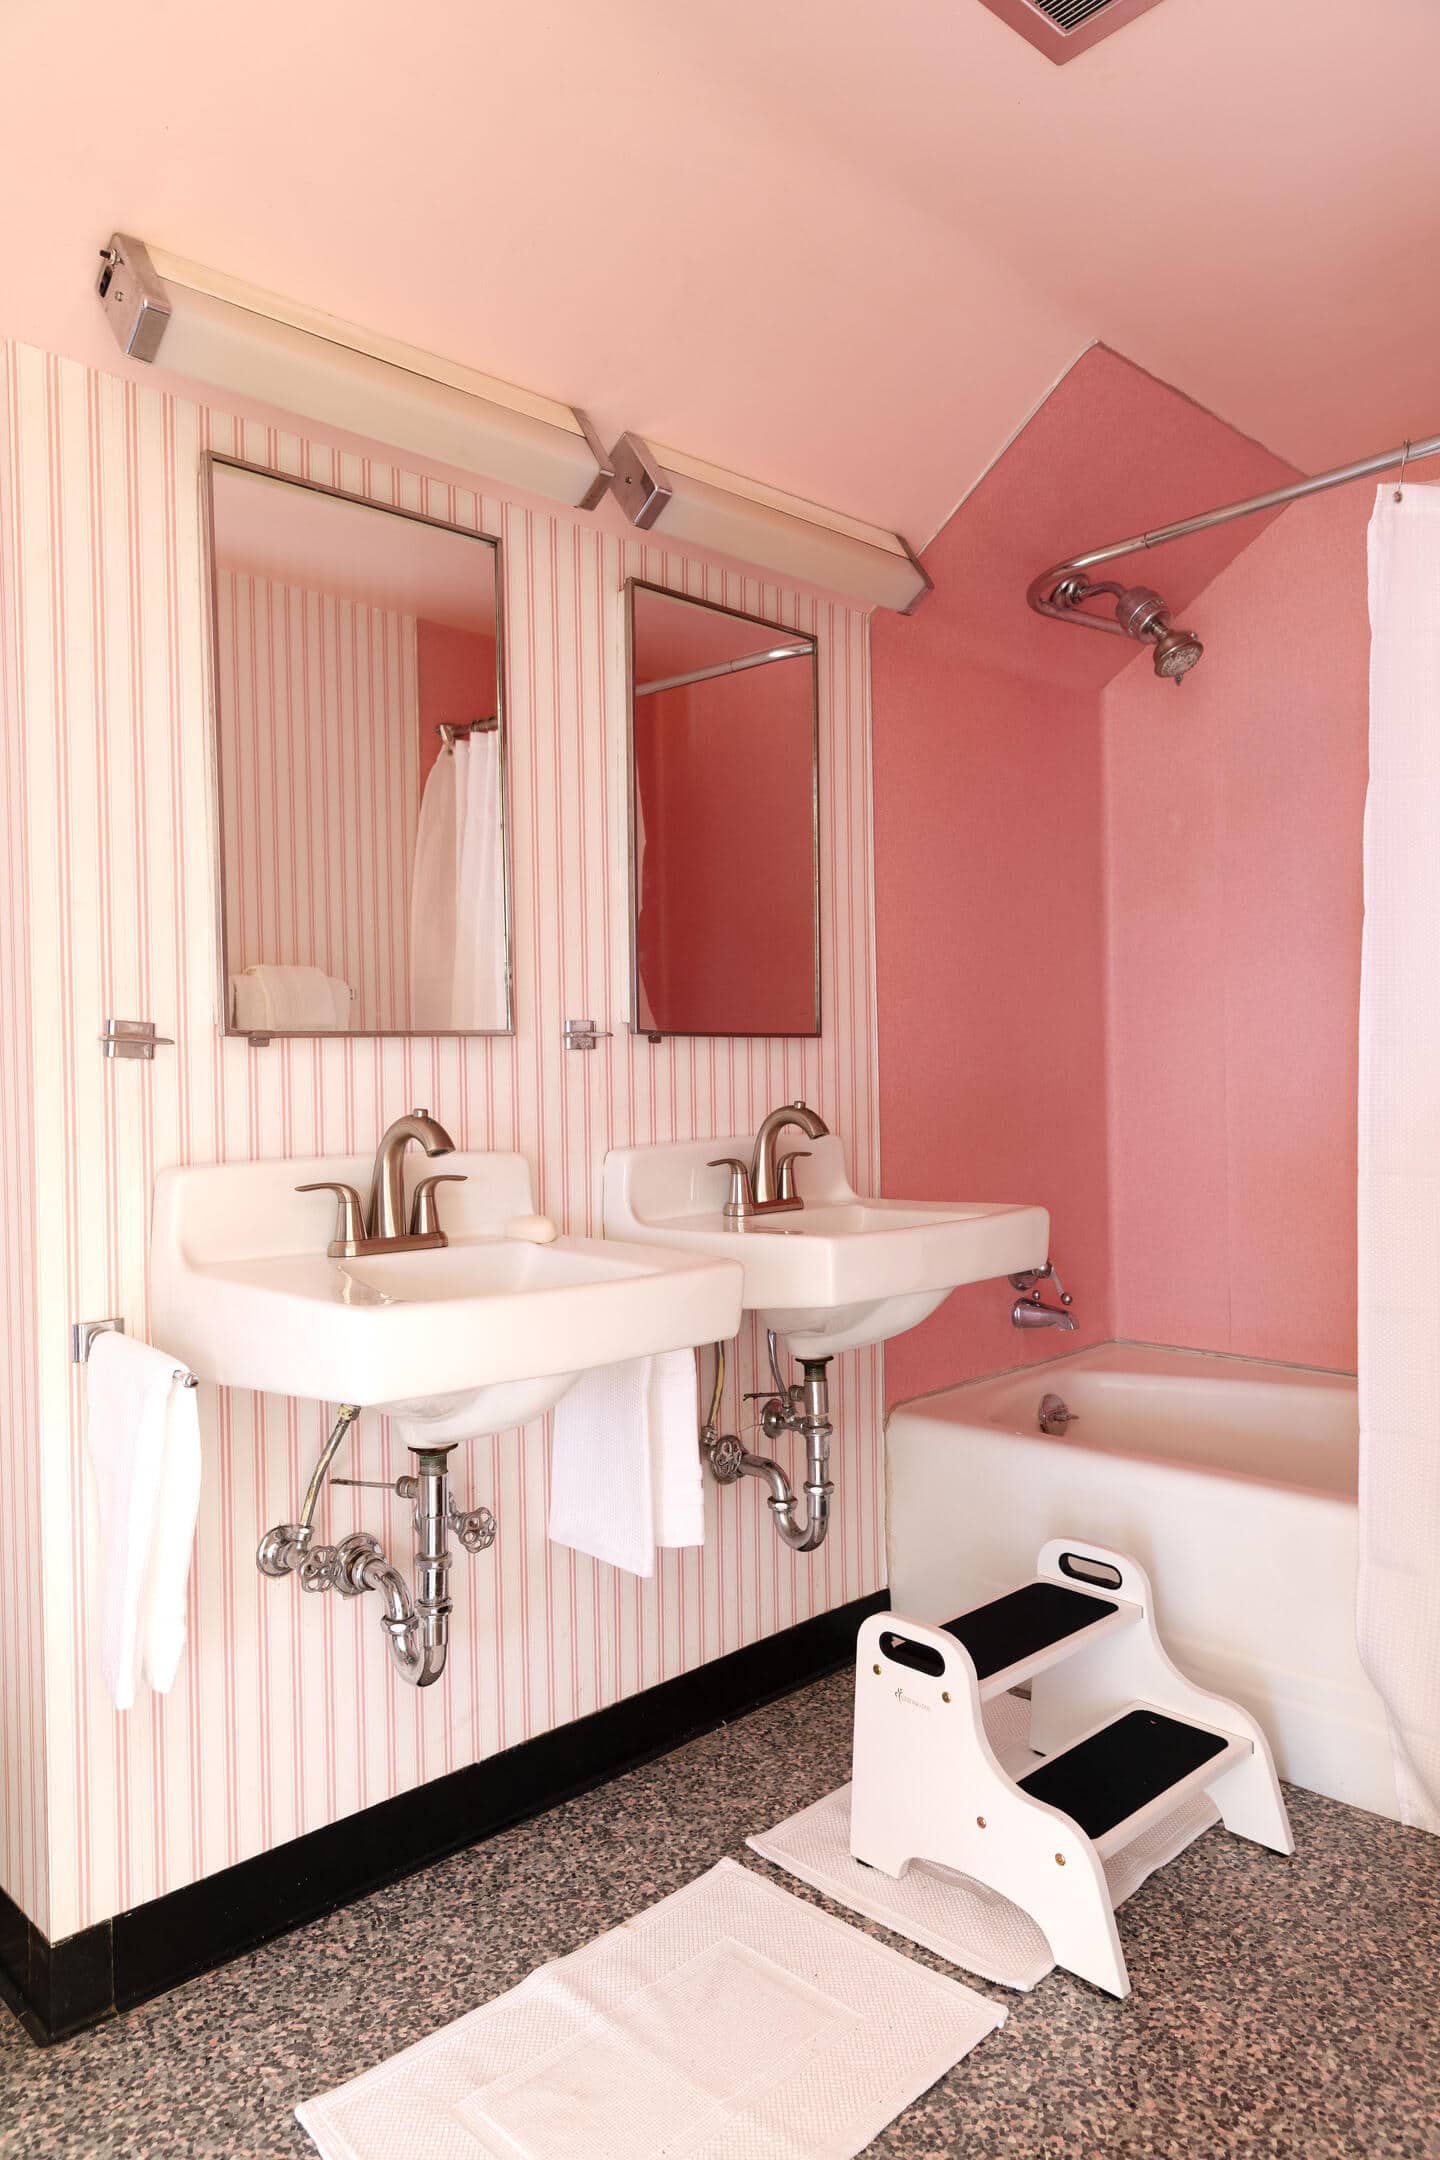 New Faucets for Our Vintage Pink Bathroom